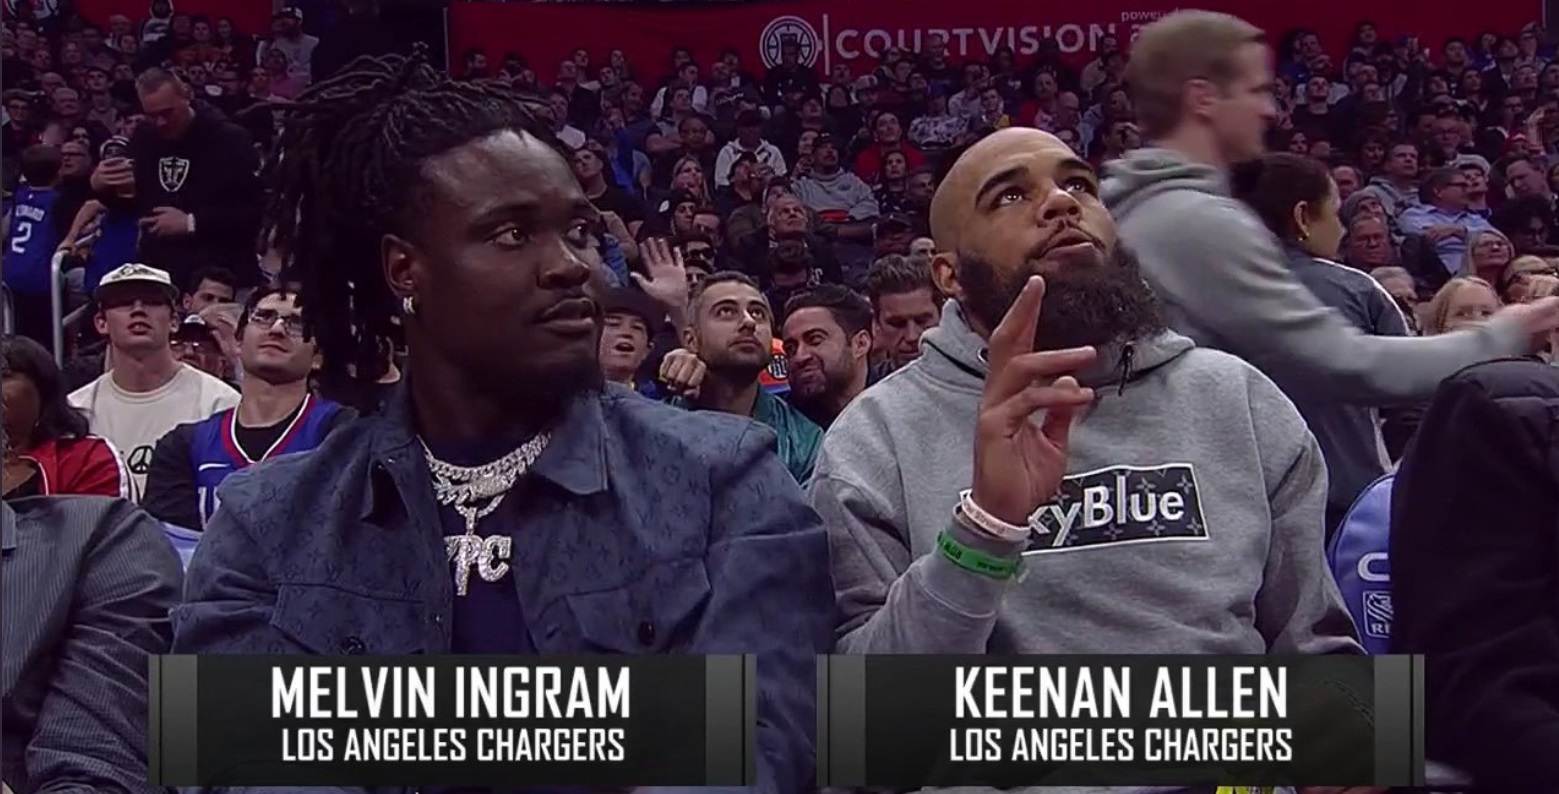 PHOTO Melvin Gordon Show On Jumbotron At Staples Center During Clippers Game And They Called Him Melvin Ingram